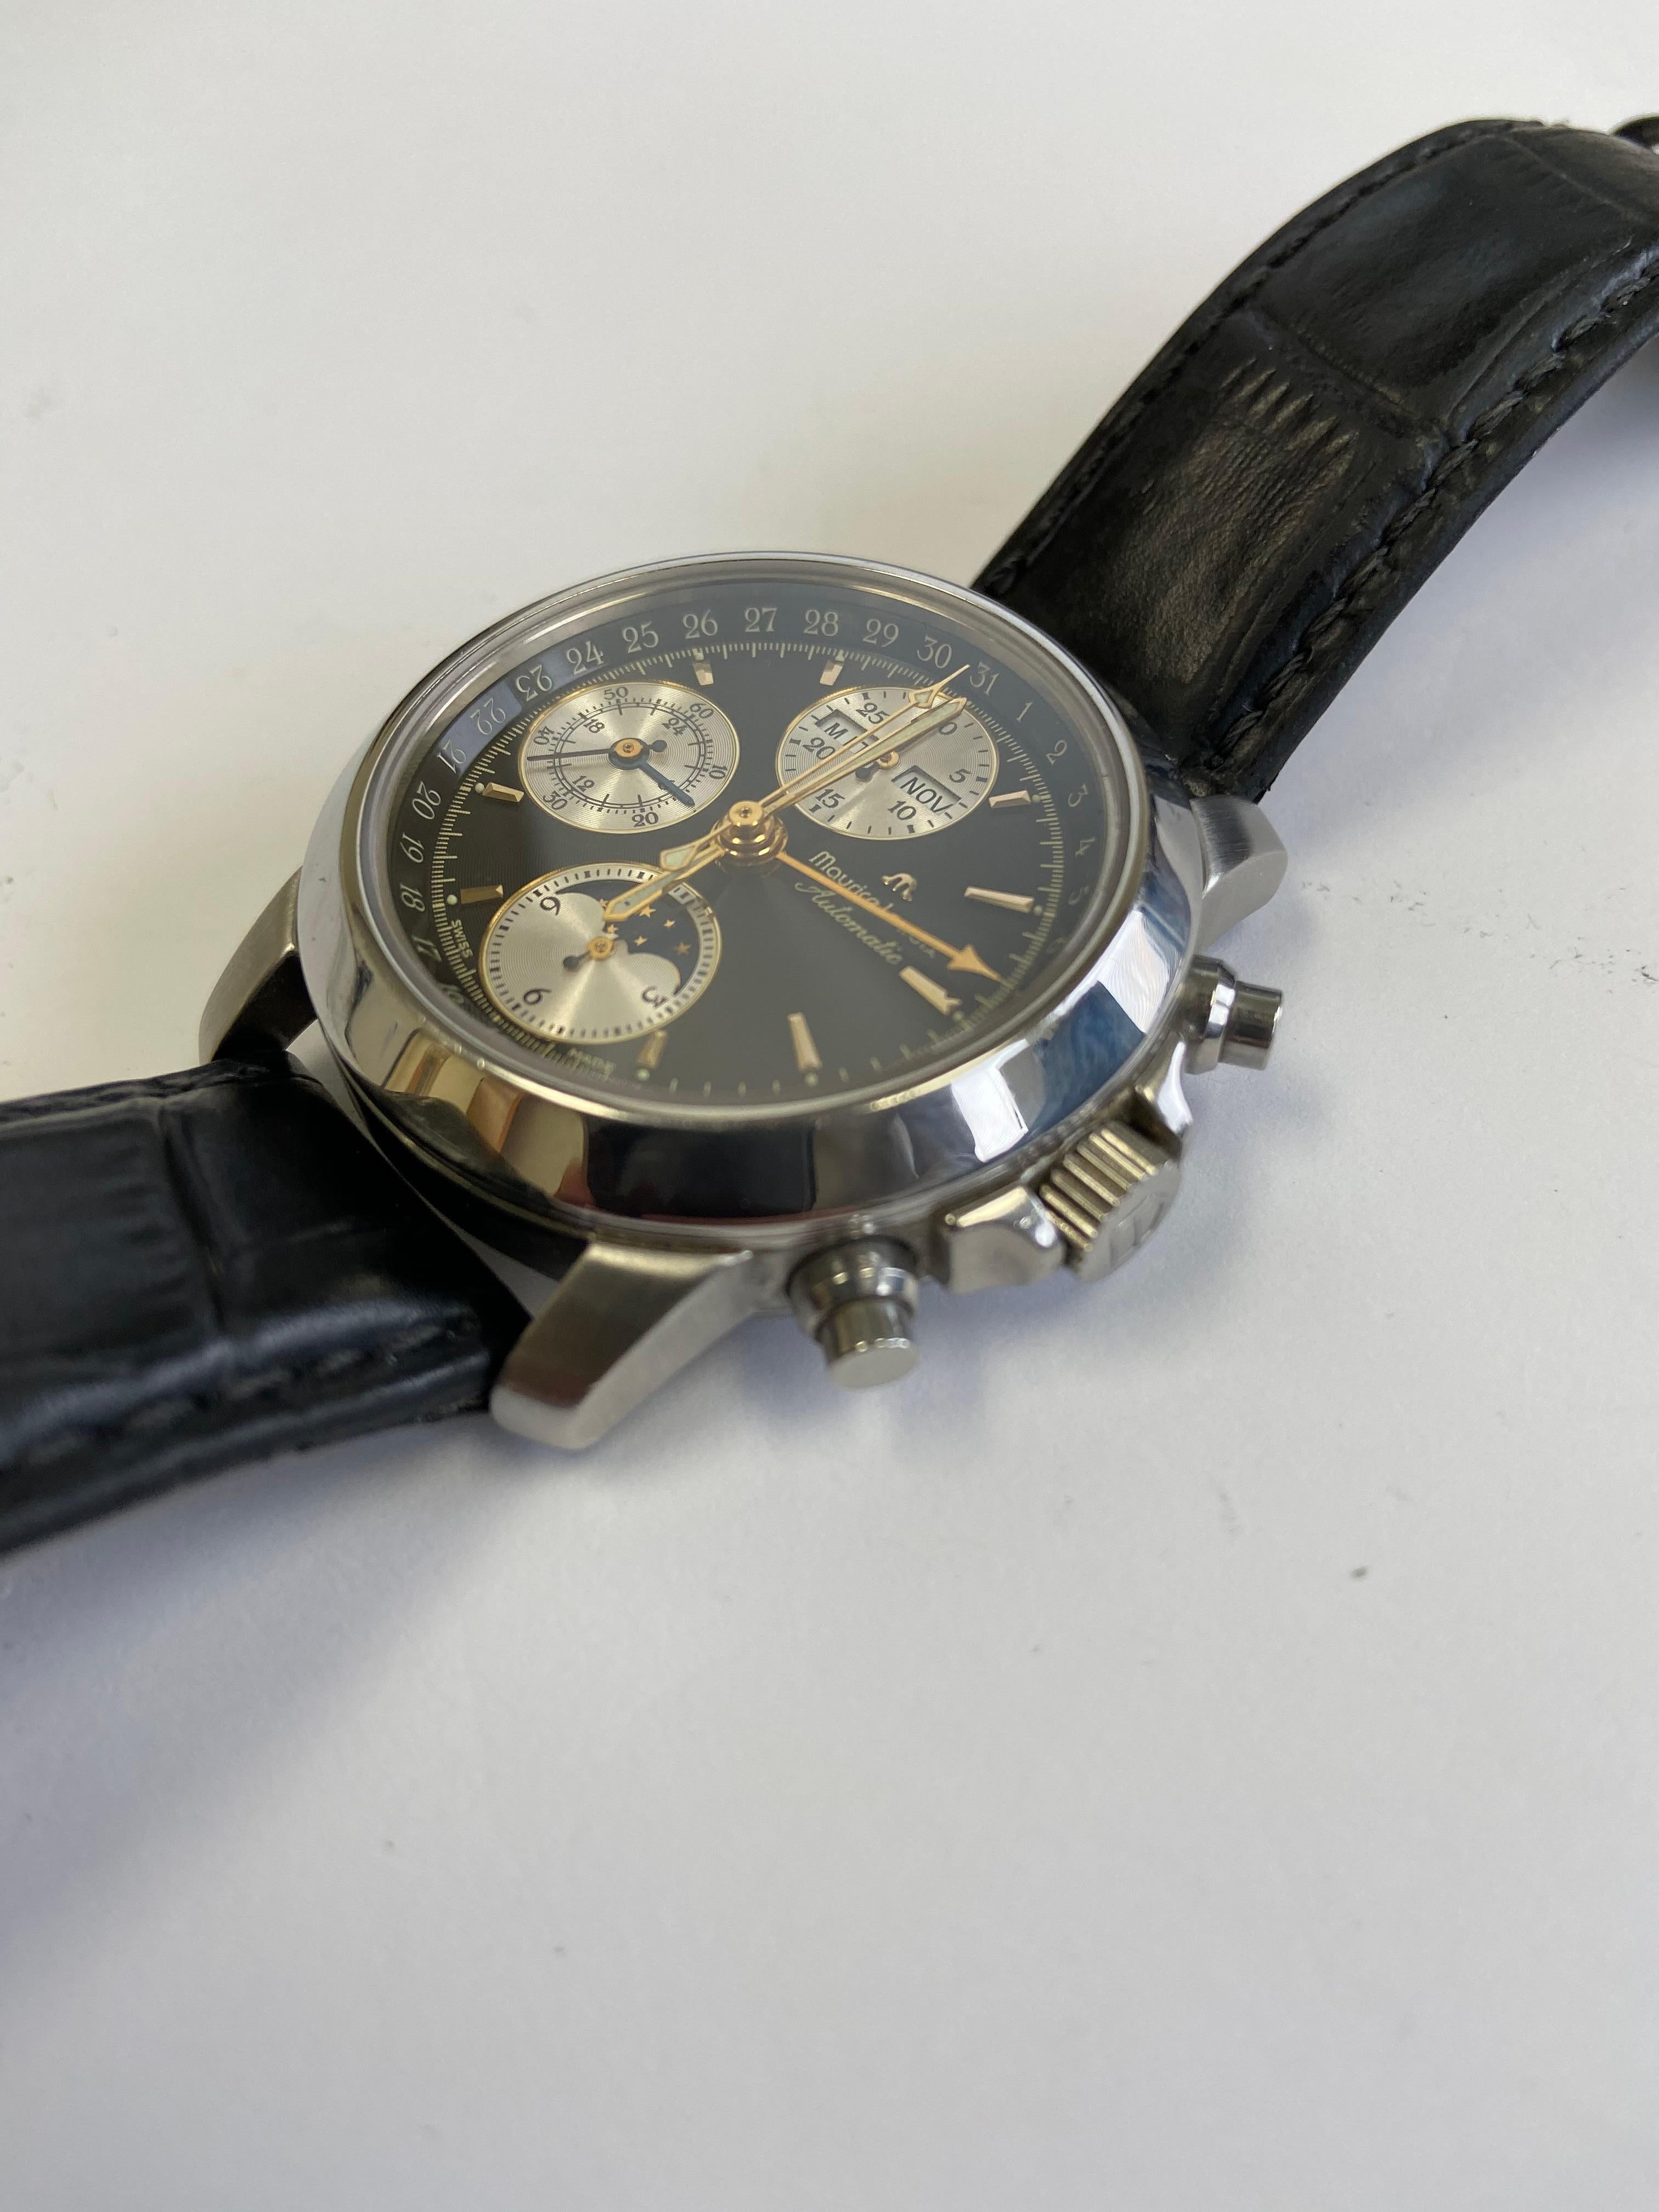 Maurice Lacroix Moonphase Triple Date Chronograph Ref 02736 Leather Strap In Good Condition For Sale In Houston, TX